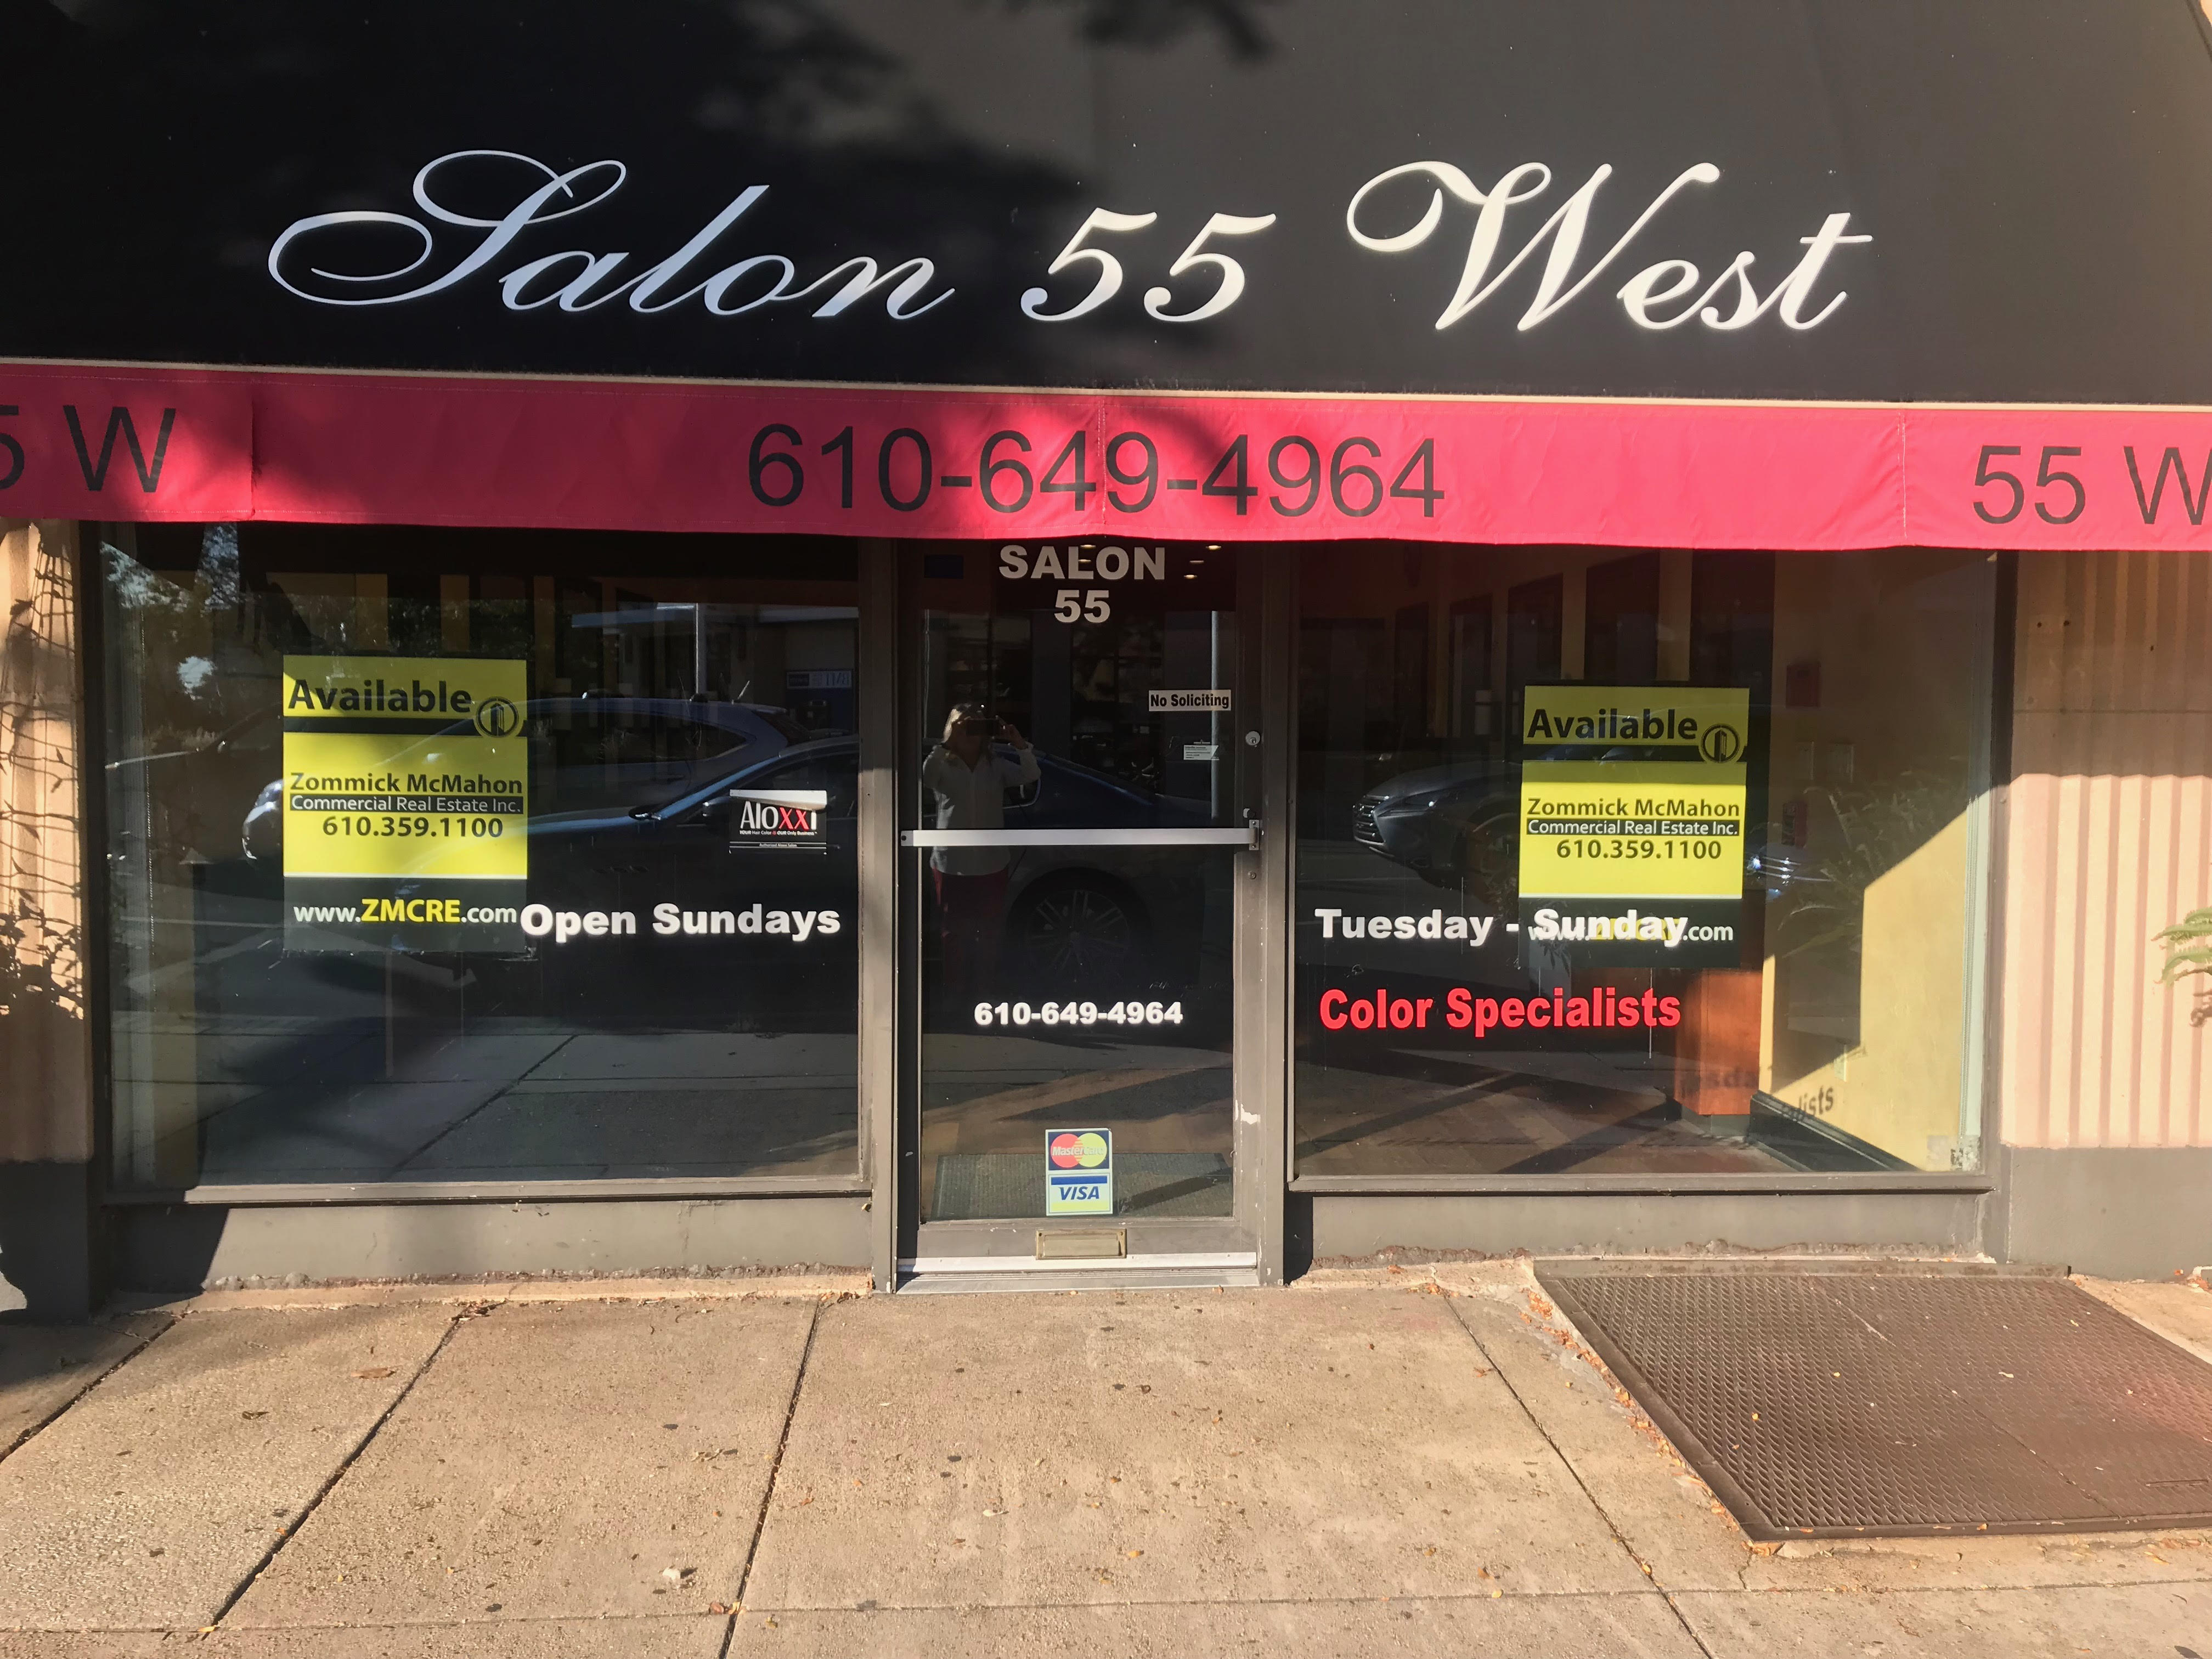 Main Line Hair Salon for Lease!!!! Listed and Leased 33 DAYS! - Zommick  McMahon Commercial Real Estate, Inc.